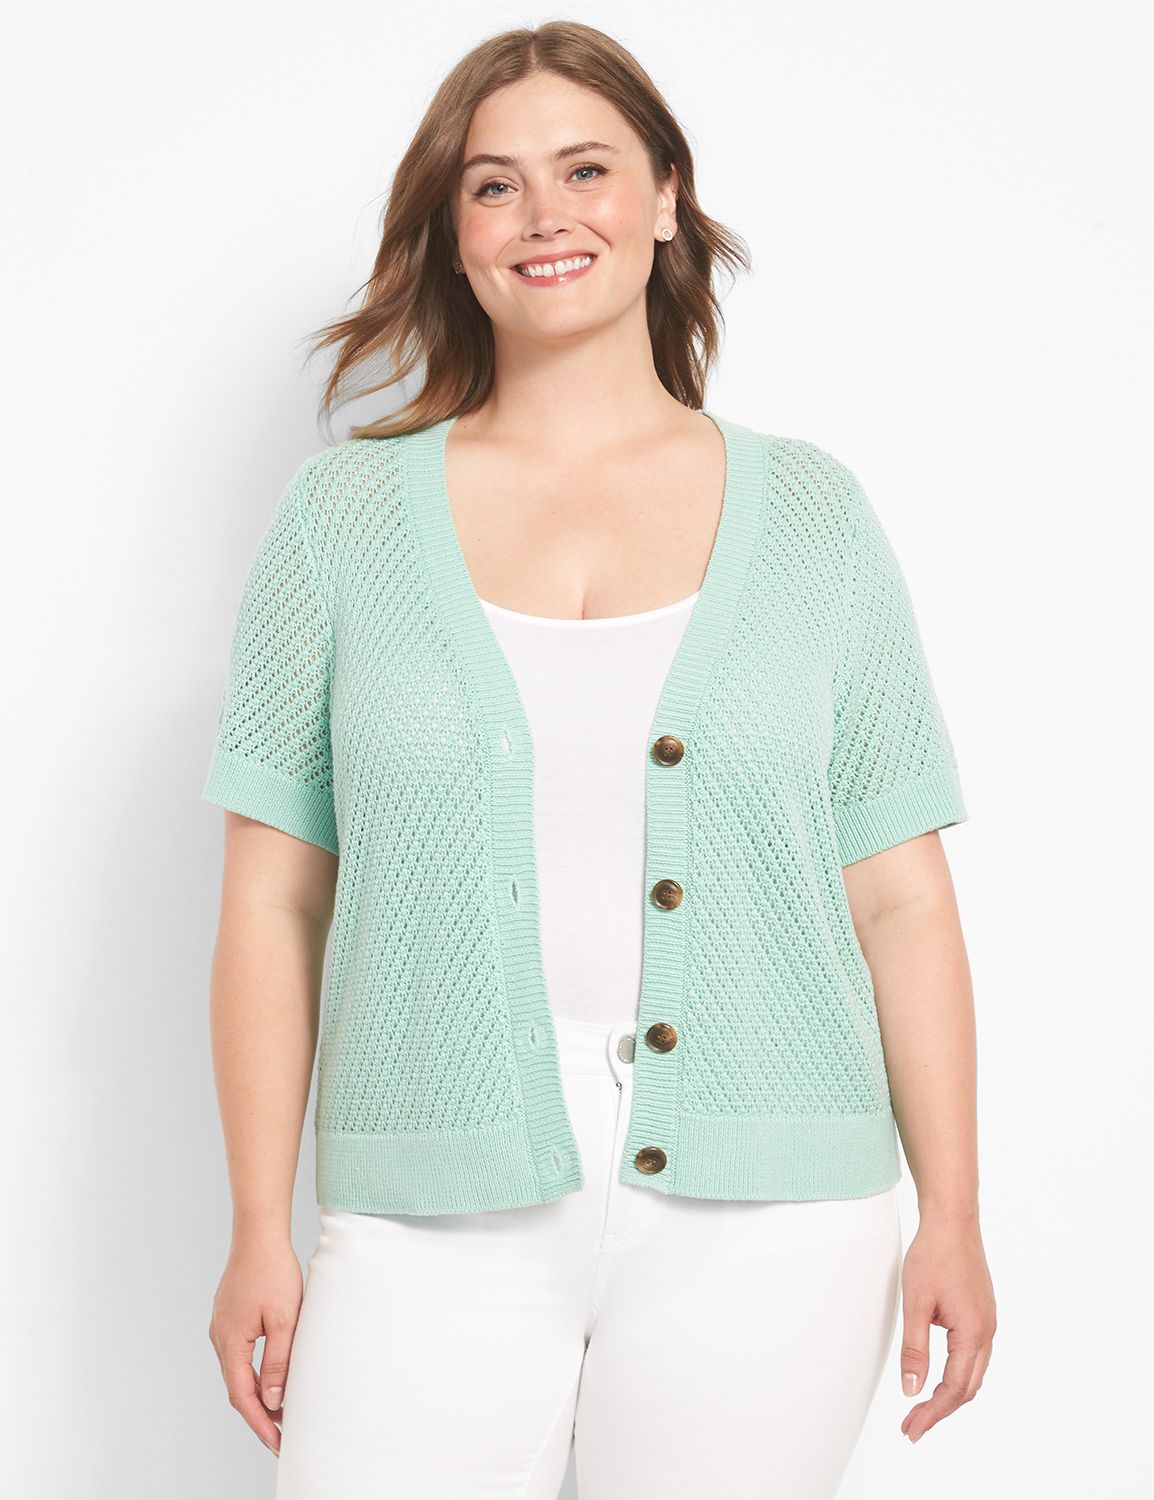 Lane Bryant Classic Short-Sleeve Button-Front Cropped Cardigan 18/20 Lichen